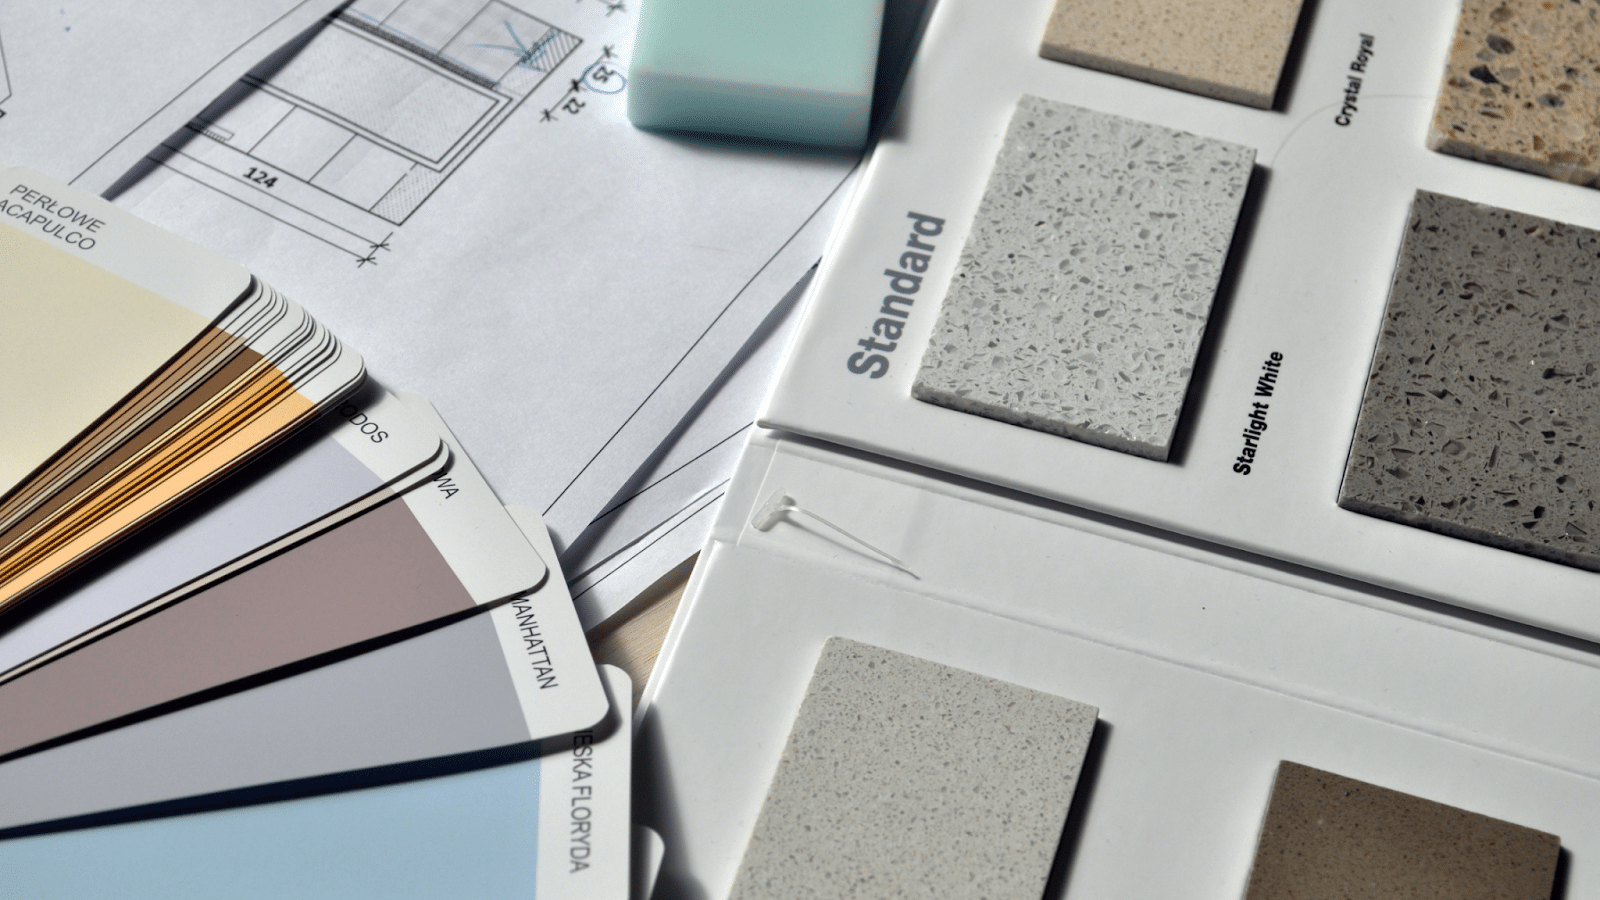 Color pallet options with tile and floor plan options.